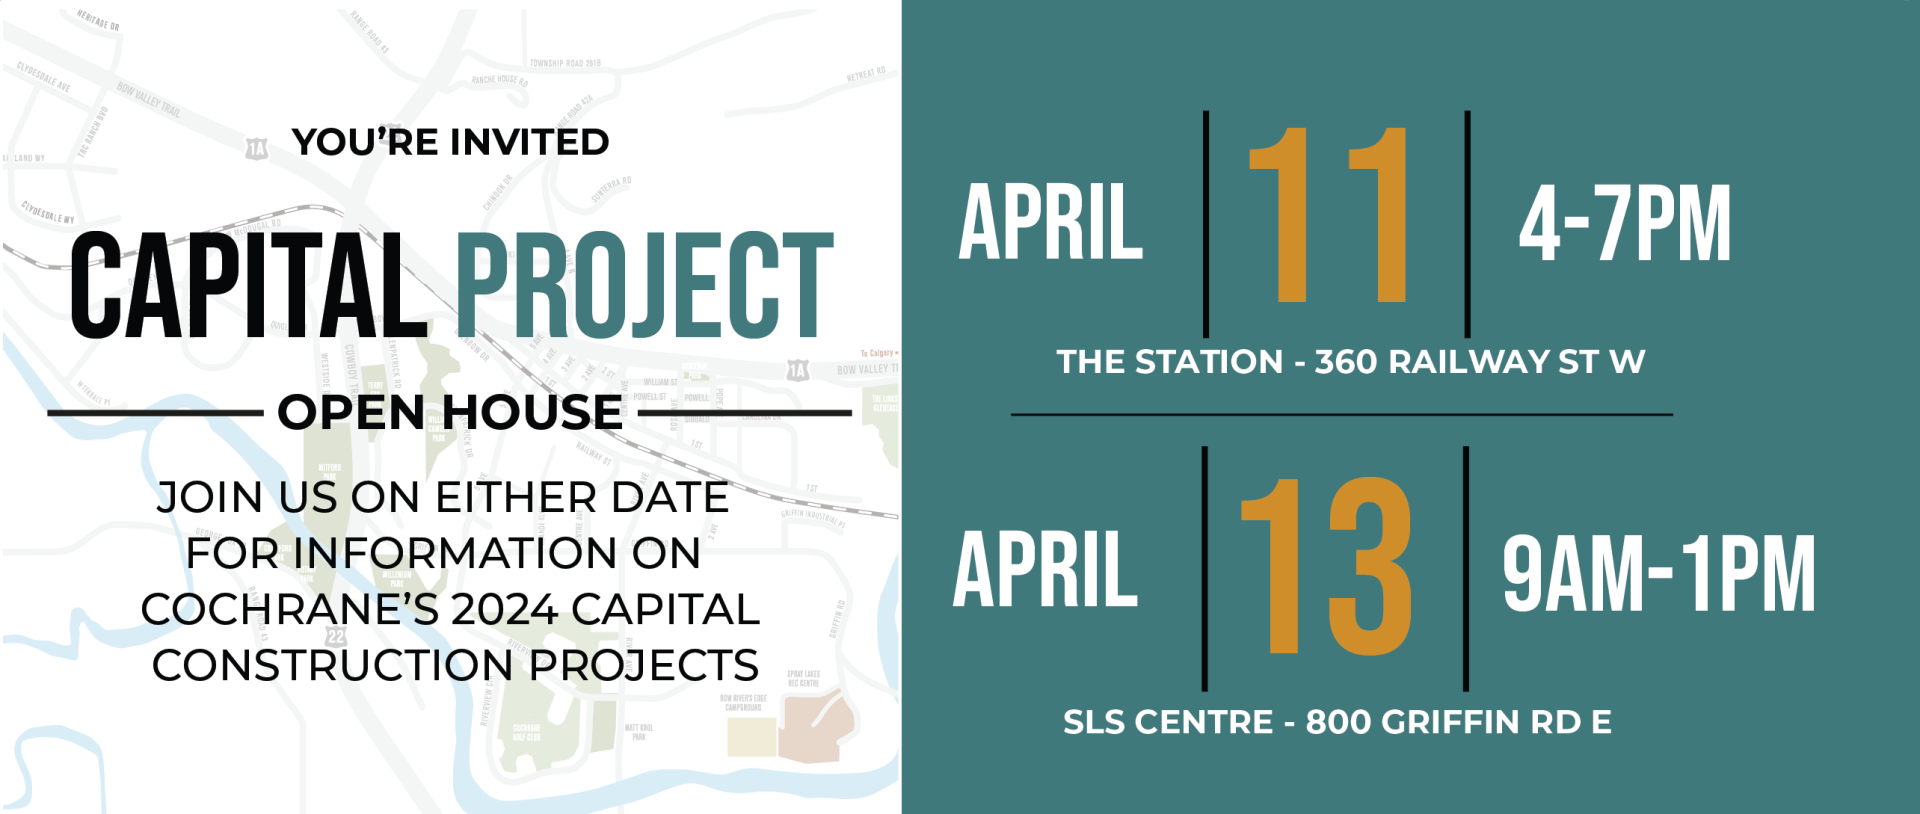 Capital project open house advertisement